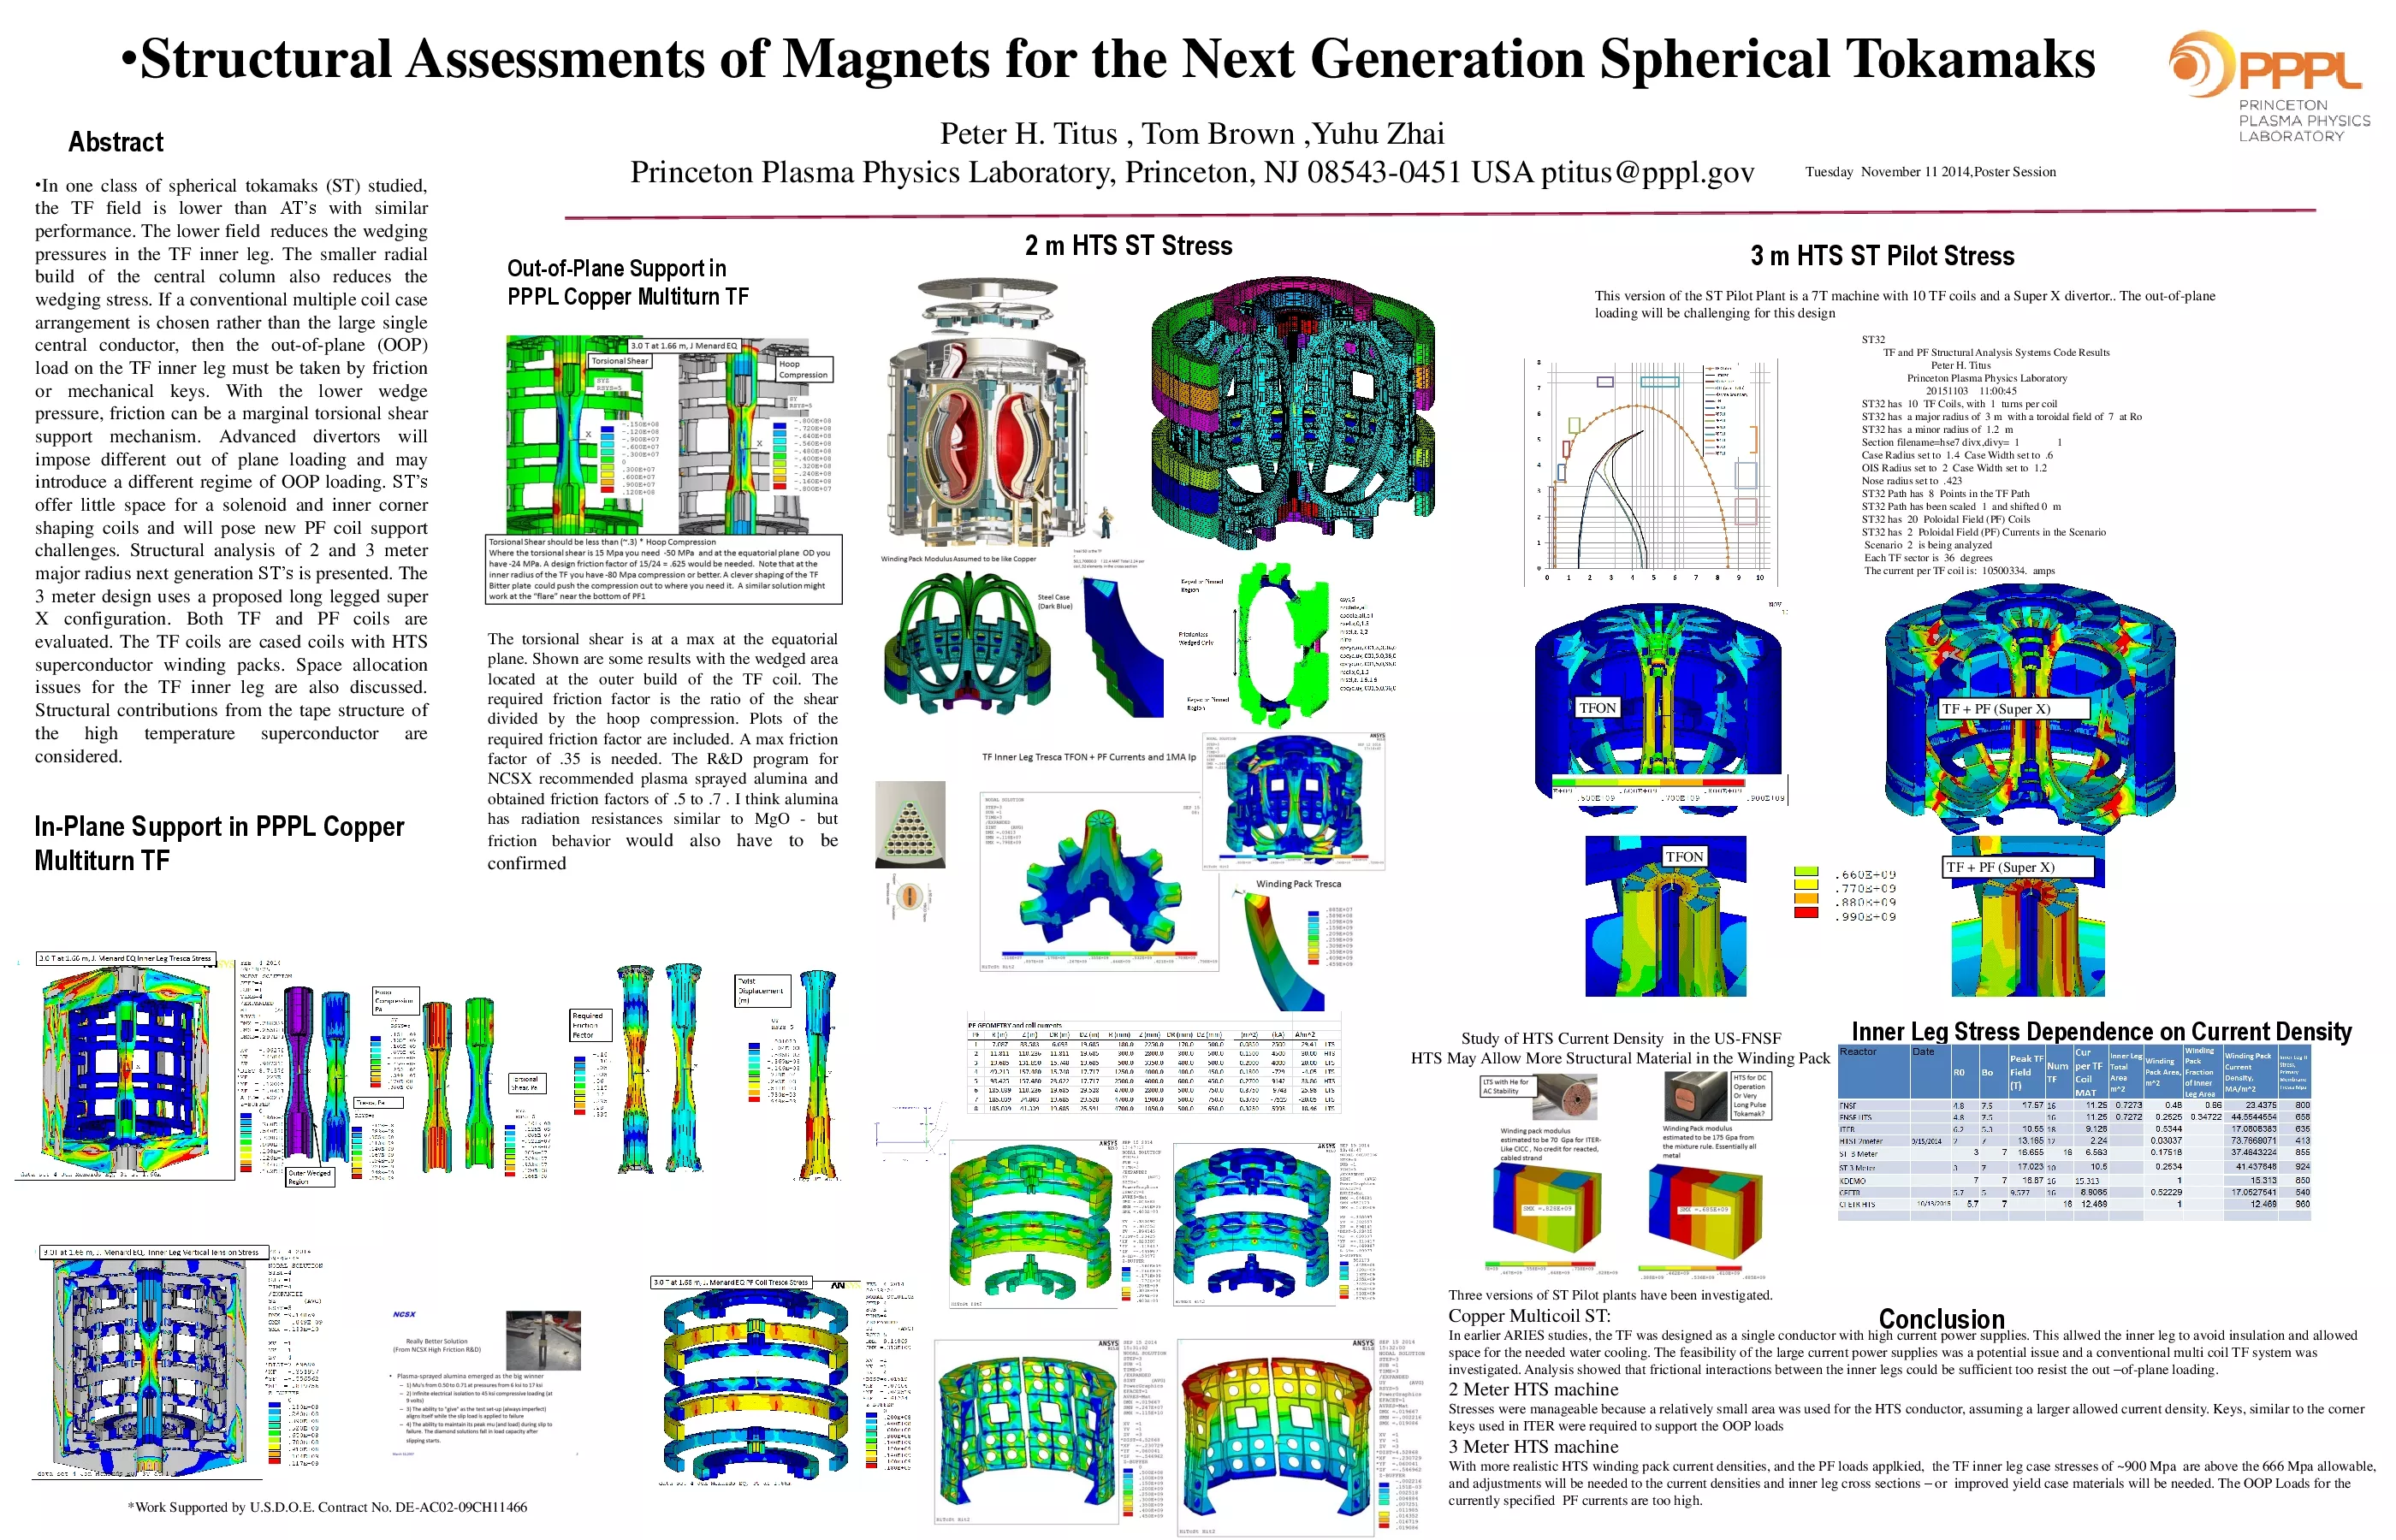 Structural Assessments of Magnets for the Next Generation